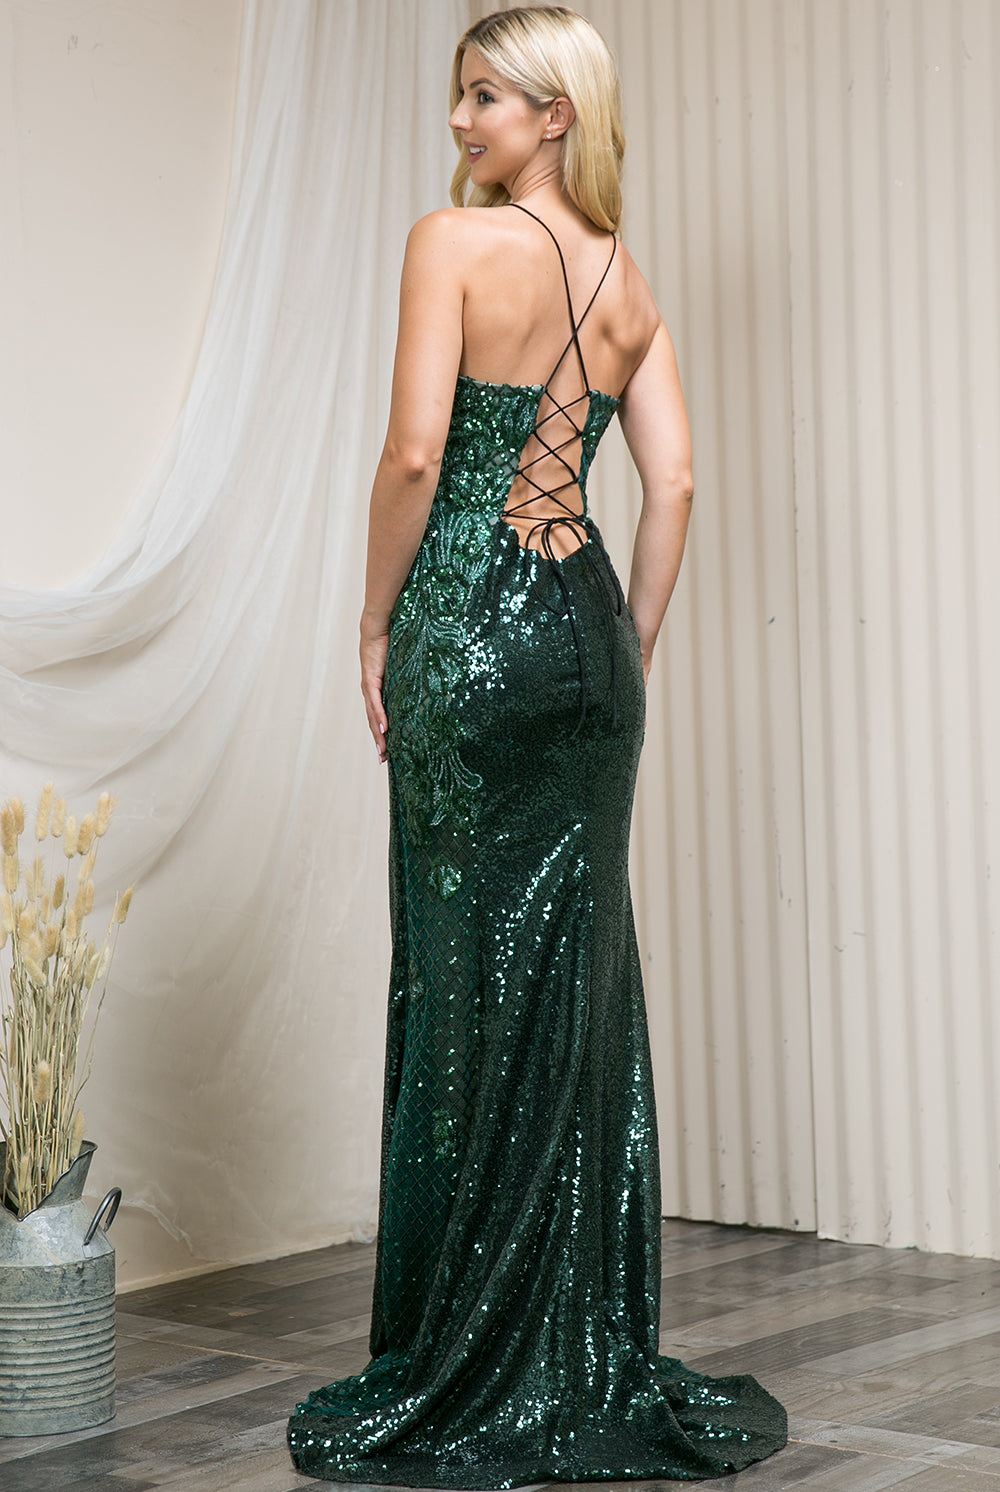 Embroidered Sequins Halter Open Criss Cross Back Long Prom Dress AC5043-Prom Dress-smcfashion.com